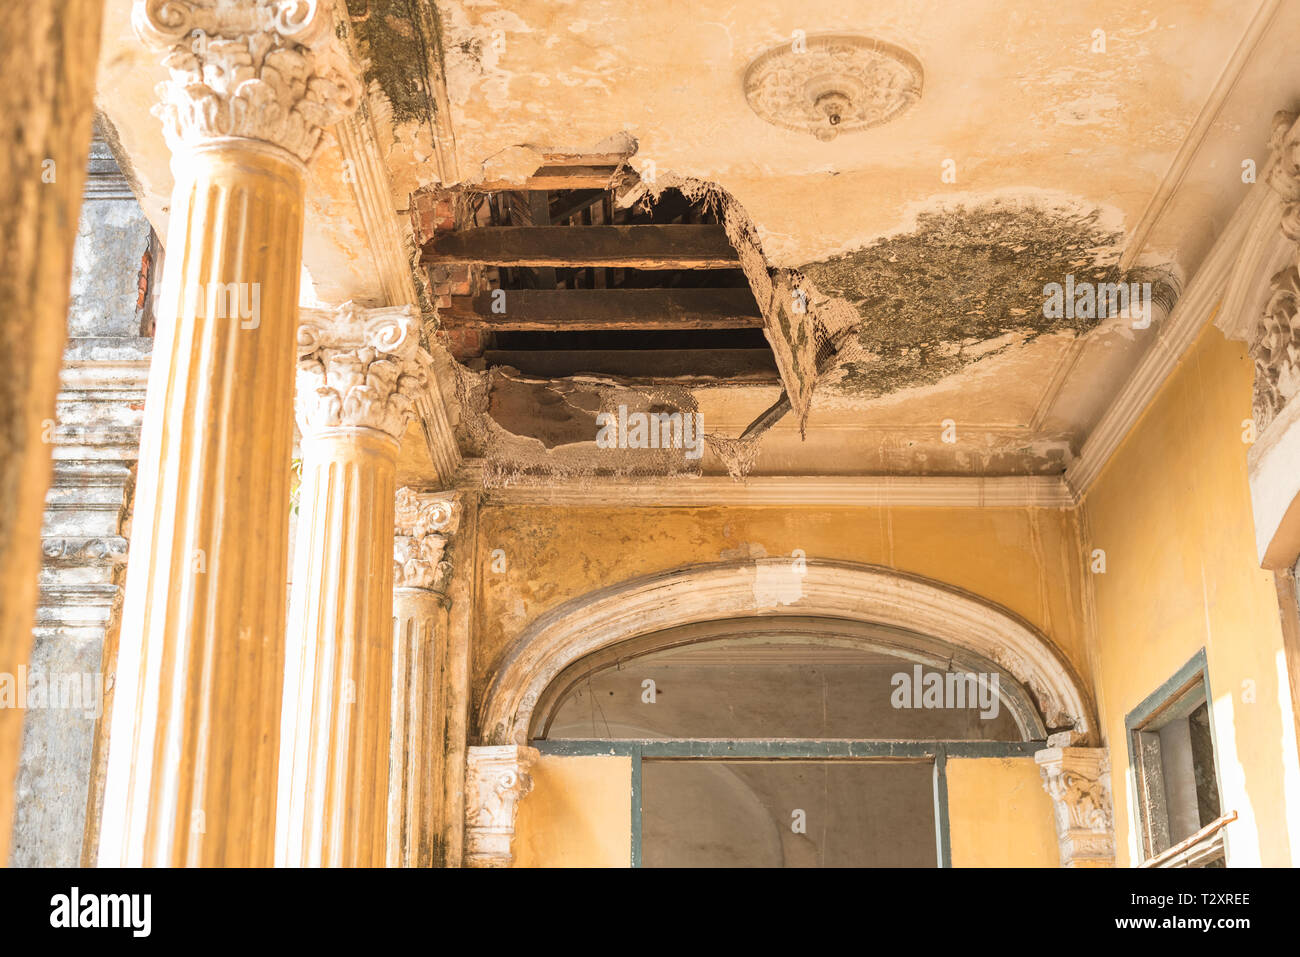 Hole in the plaster ceiling in the Mansion or Villa Bodega, a half-ruined colonial-era building (1910-1920s) in Phnom Penh city center, Cambodia. Stock Photo